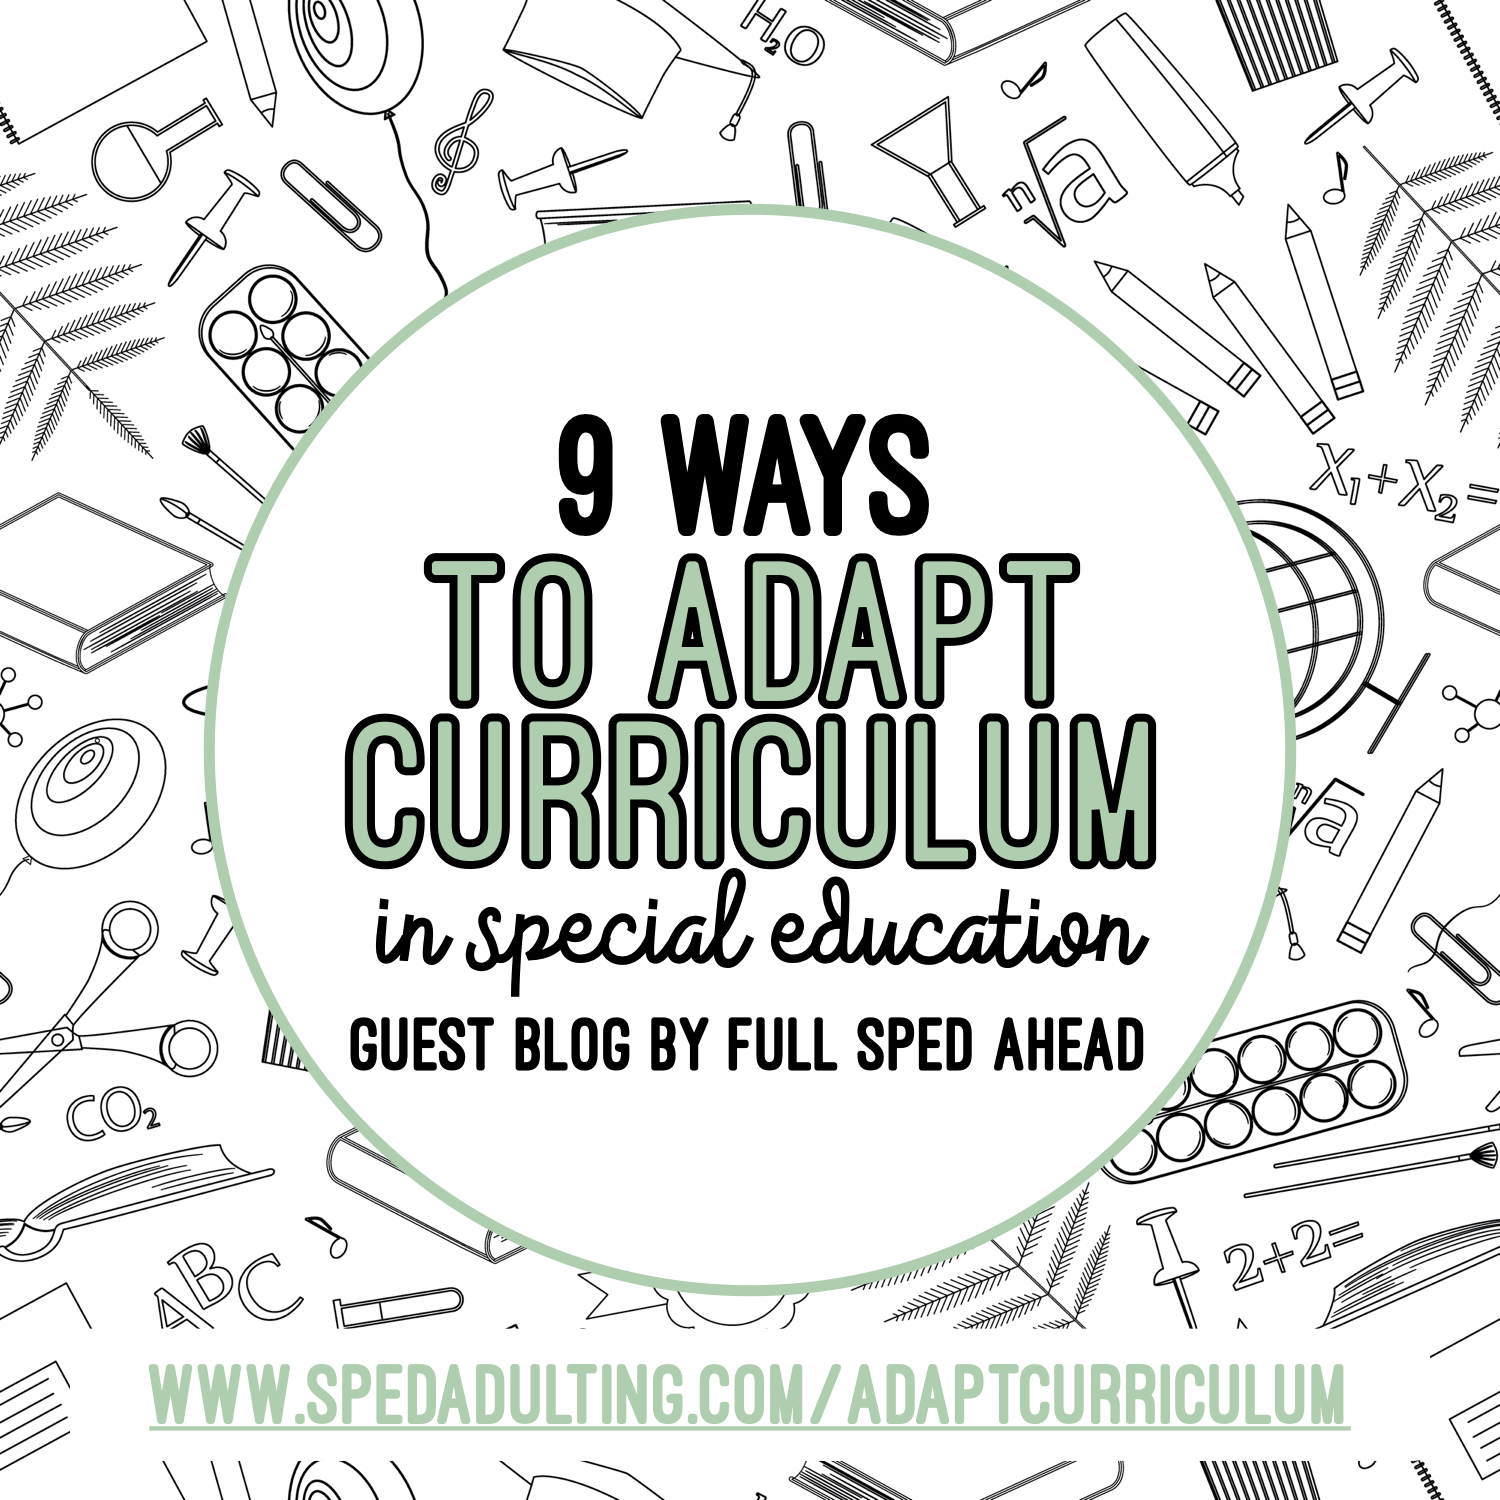 BLOG: 9 Ways to Adapt Curriculum in Special Education